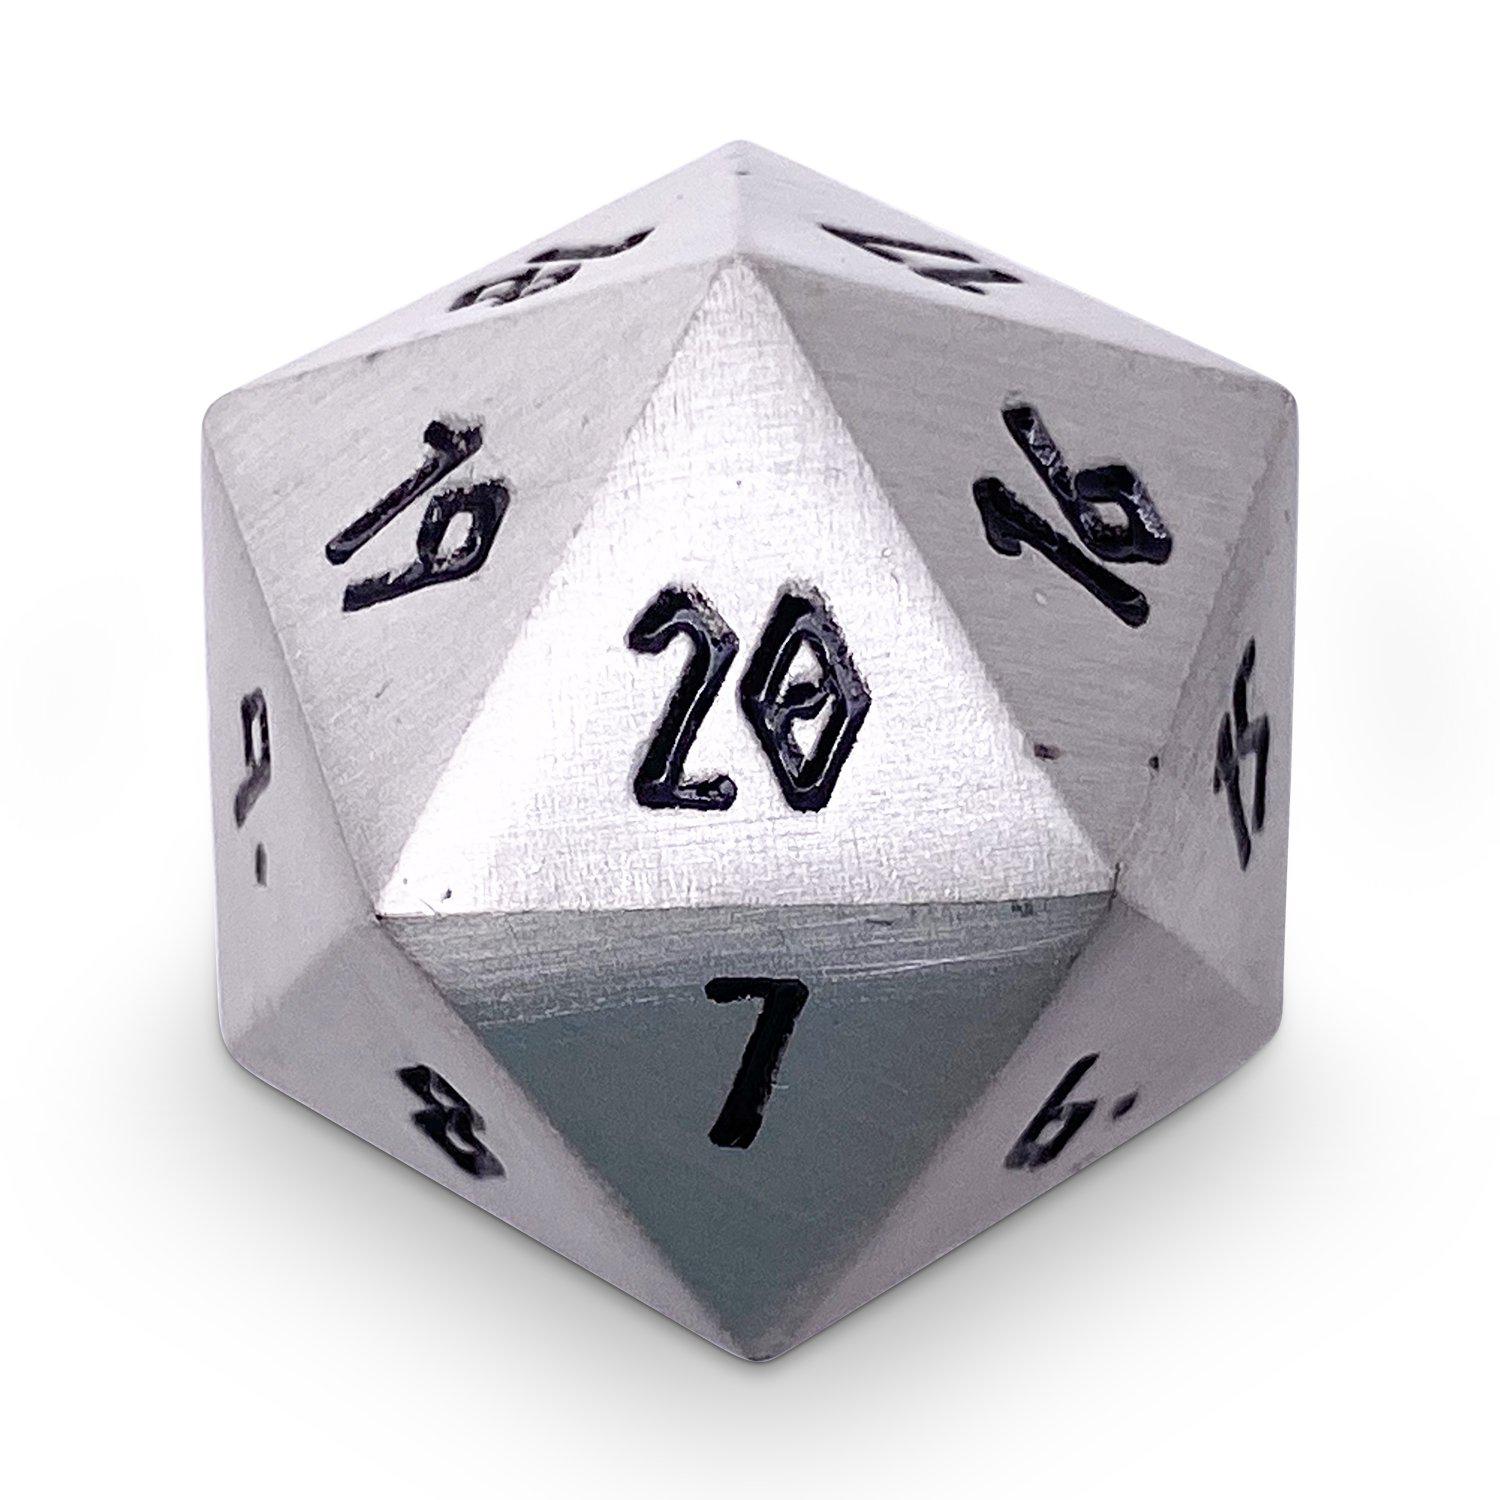 Aged Mithiral Metal Countdown Dice 25mm - NOR 03901